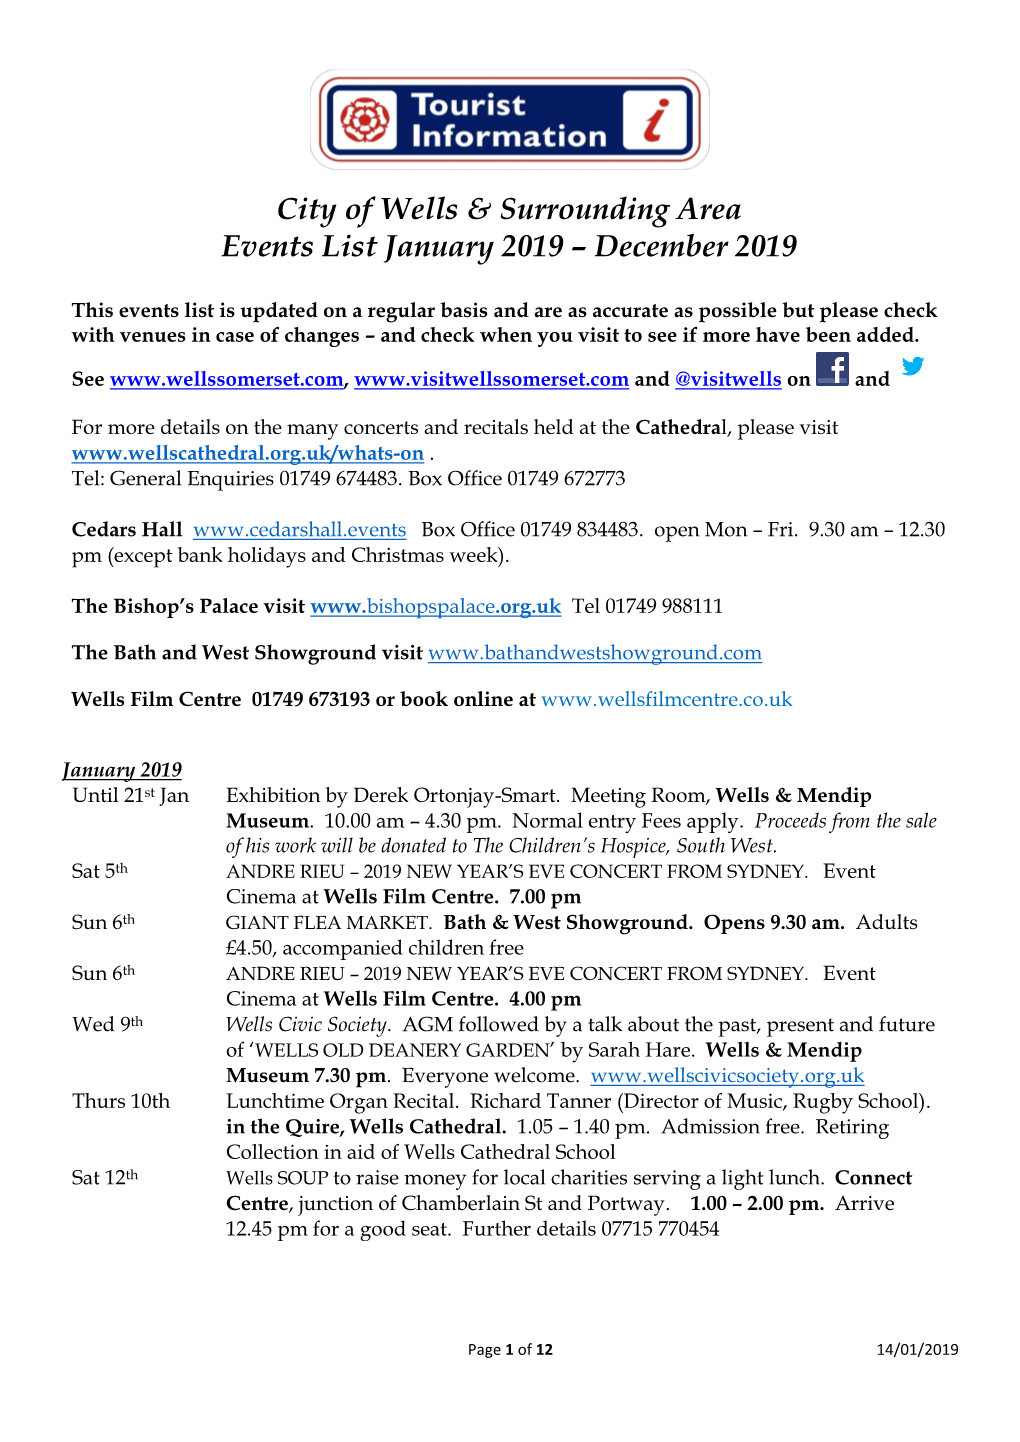 City of Wells & Surrounding Area Events List January 2019